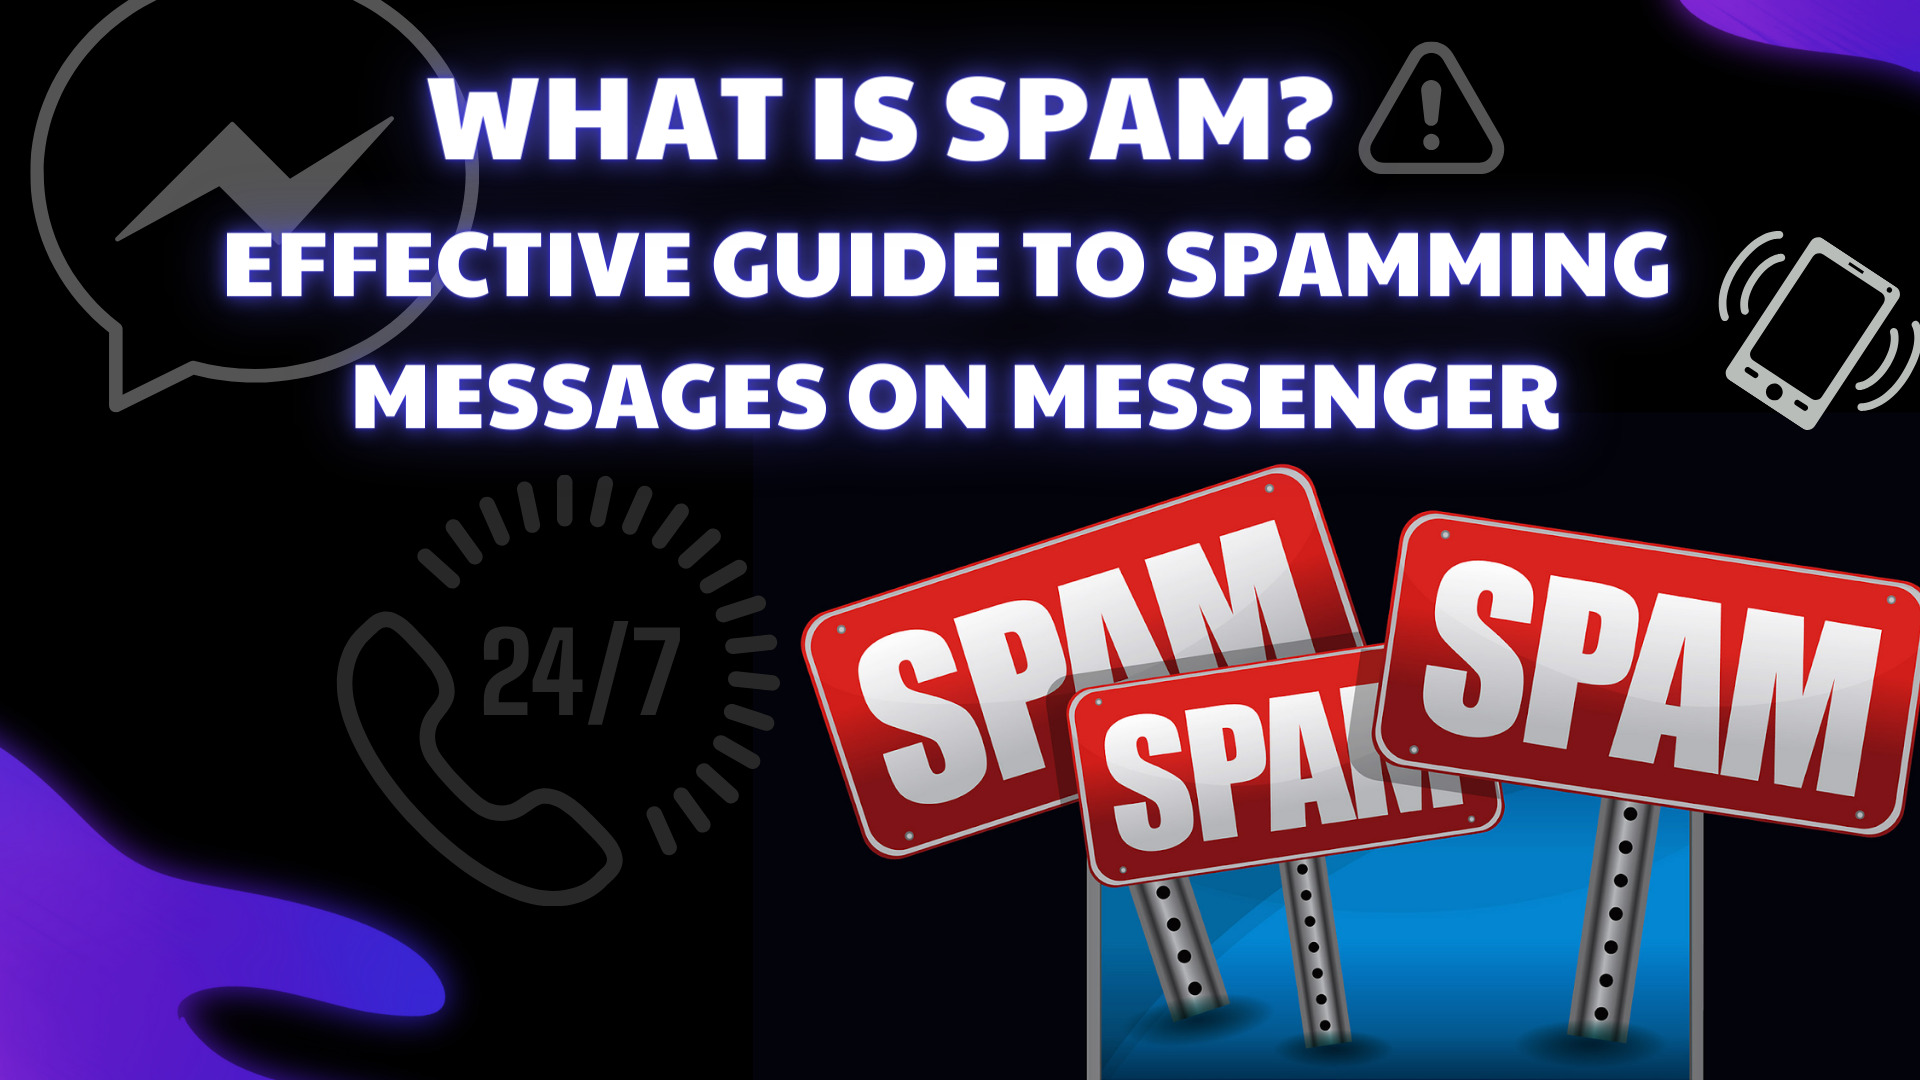 What is Spam? Effective guide to spamming messages on Messenger